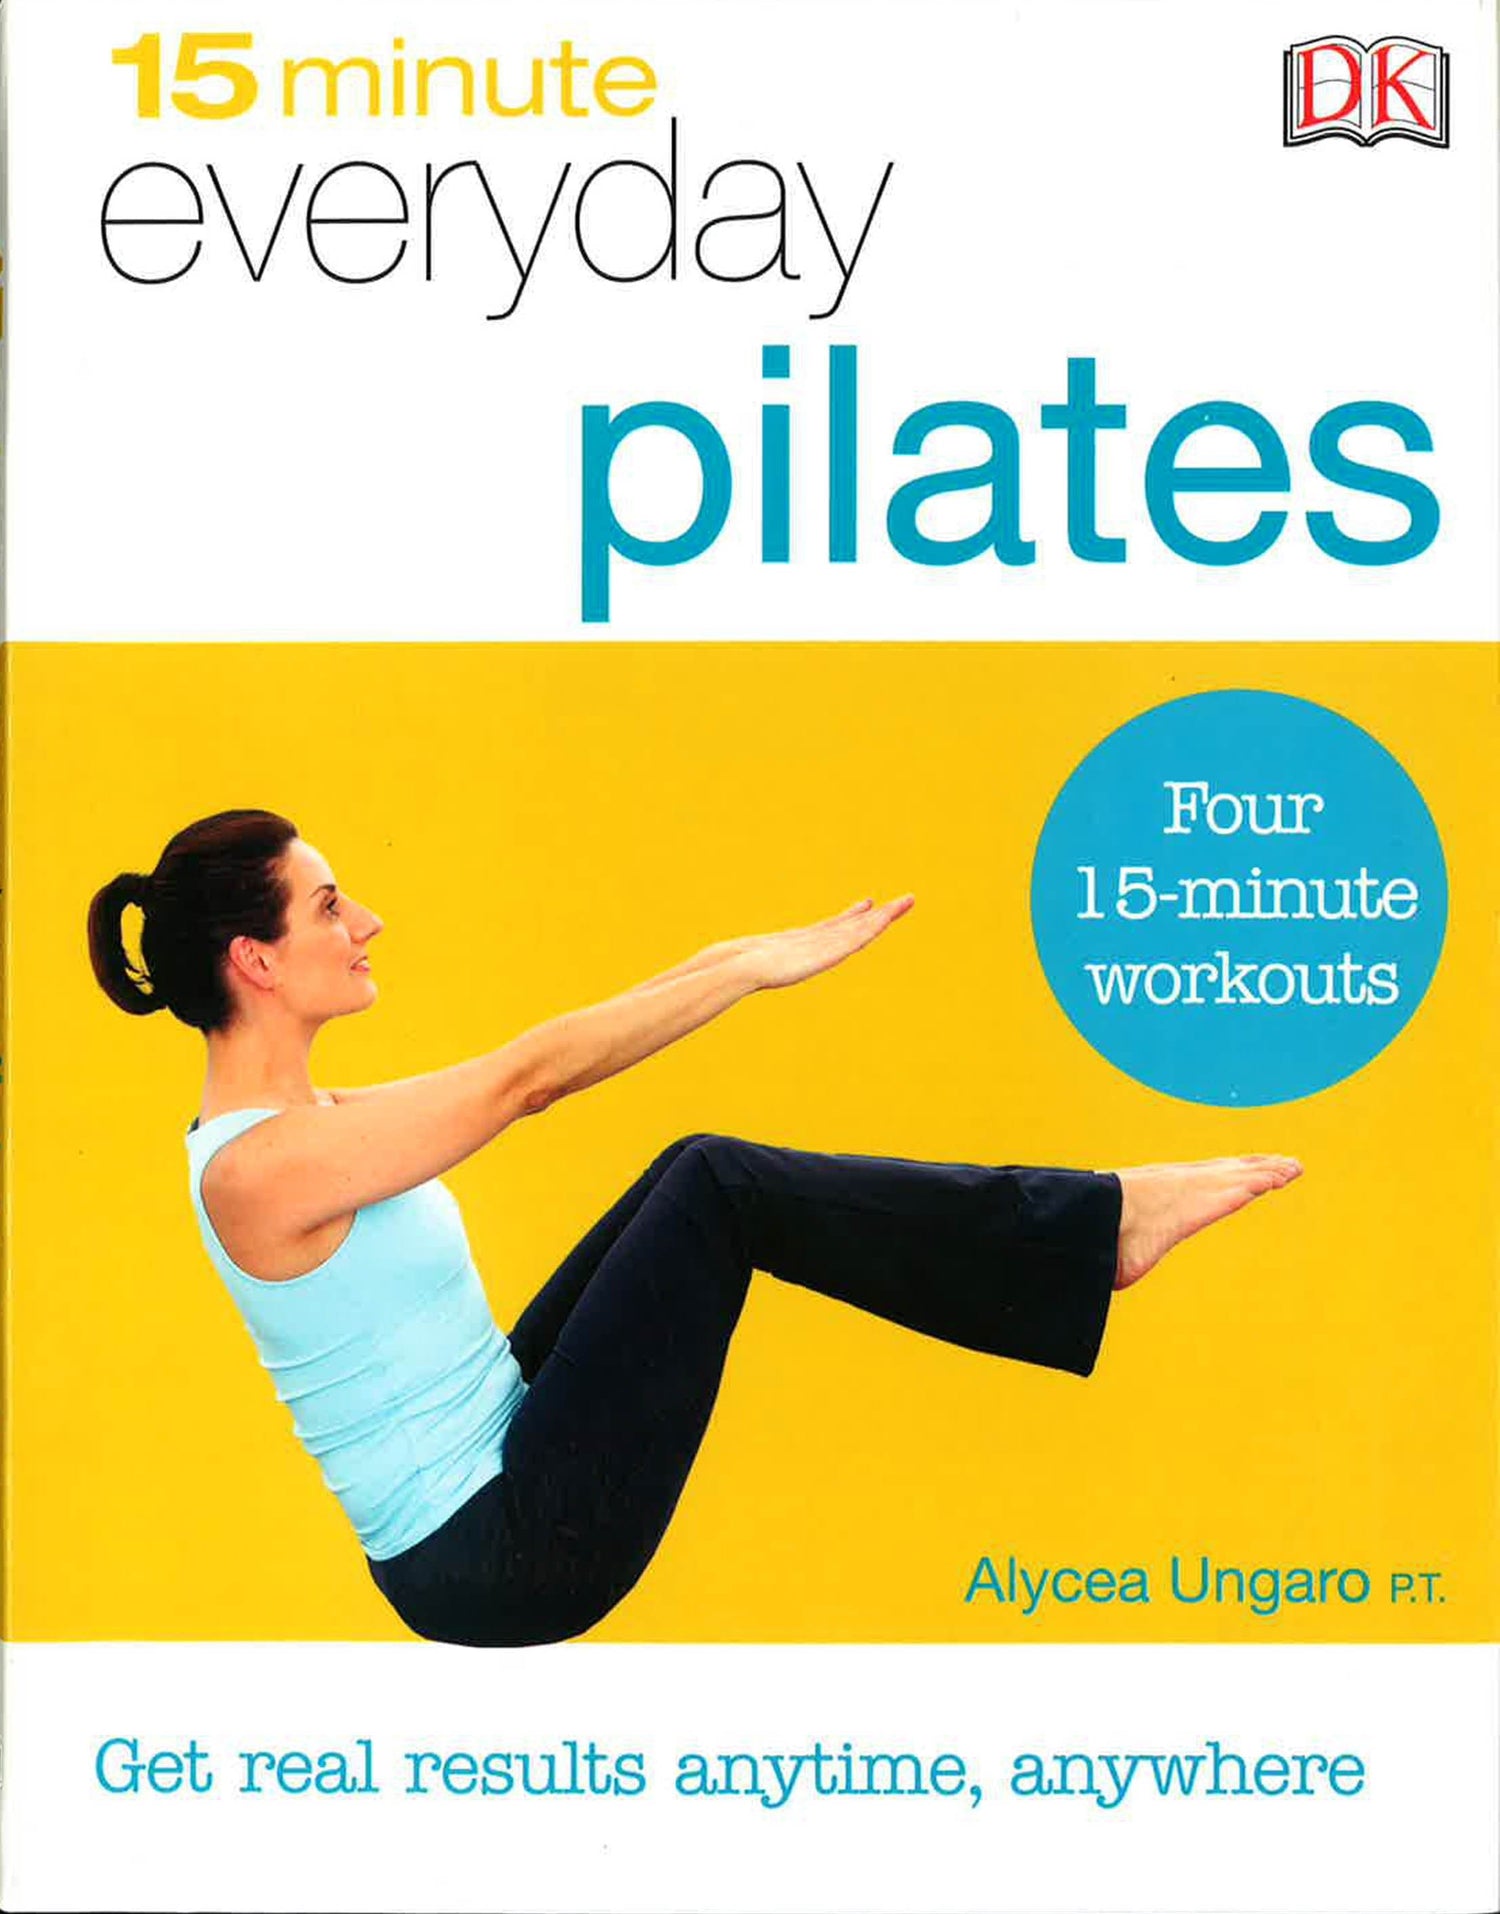 15 Minute Everyday Pilates - DAY 3 - by Alycea Ungaro - video